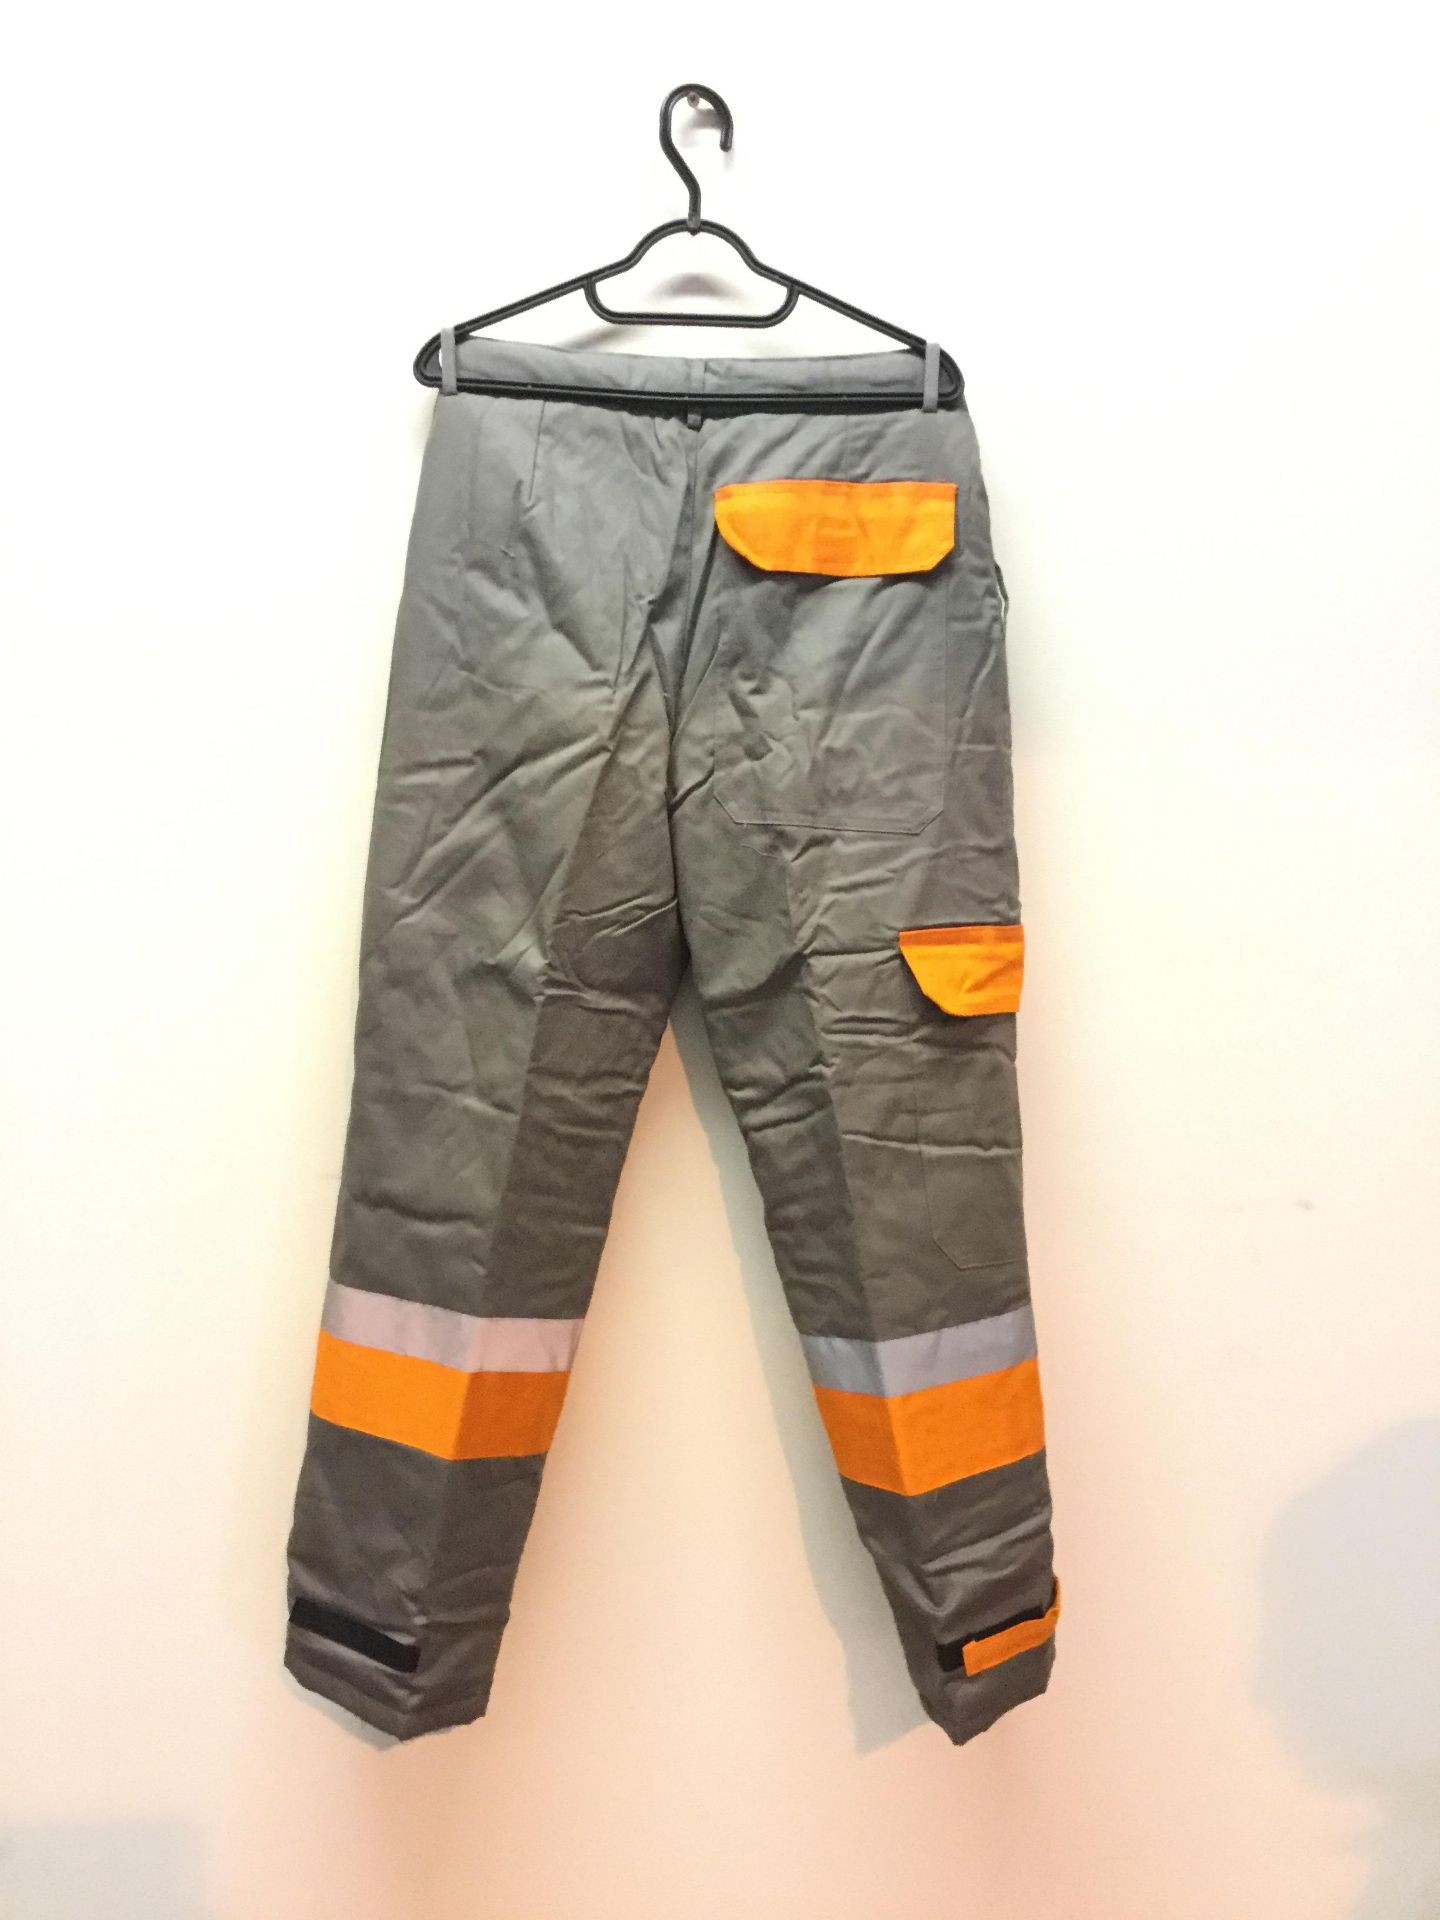 Flame Retardant Winter Trousers - Size 52 - Image 2 of 2